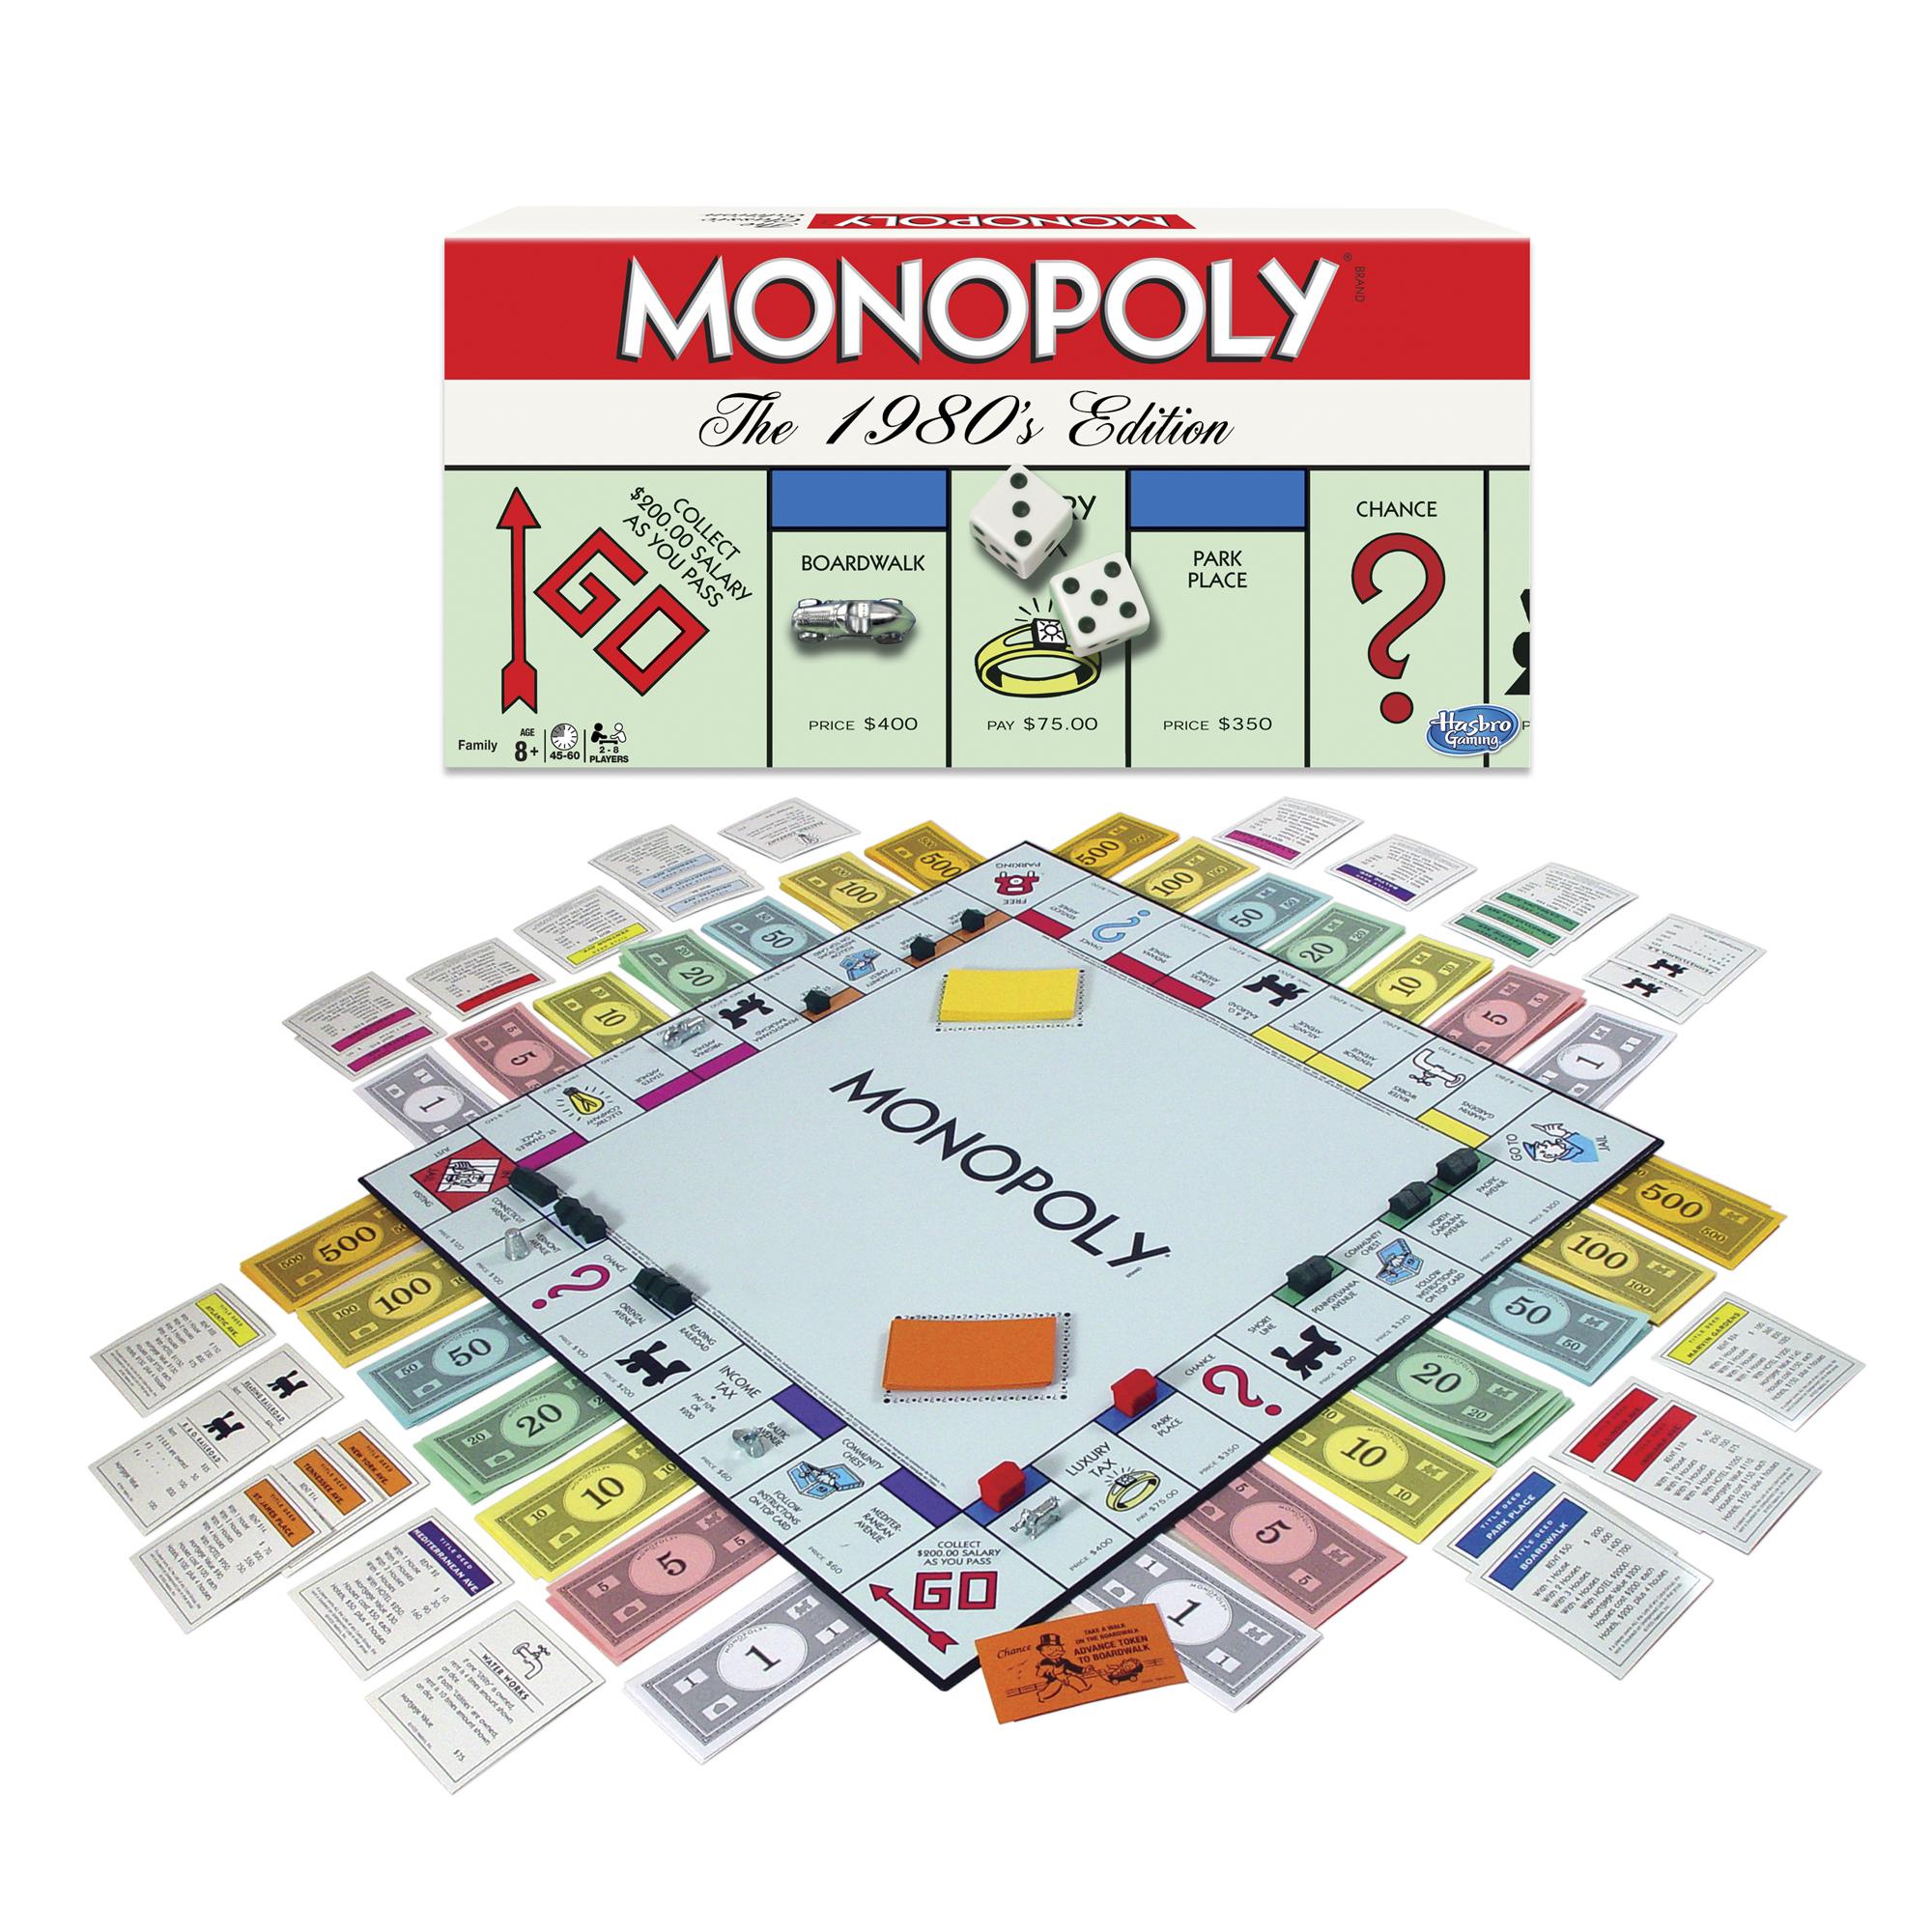 Monopoly - The 1980s Edition